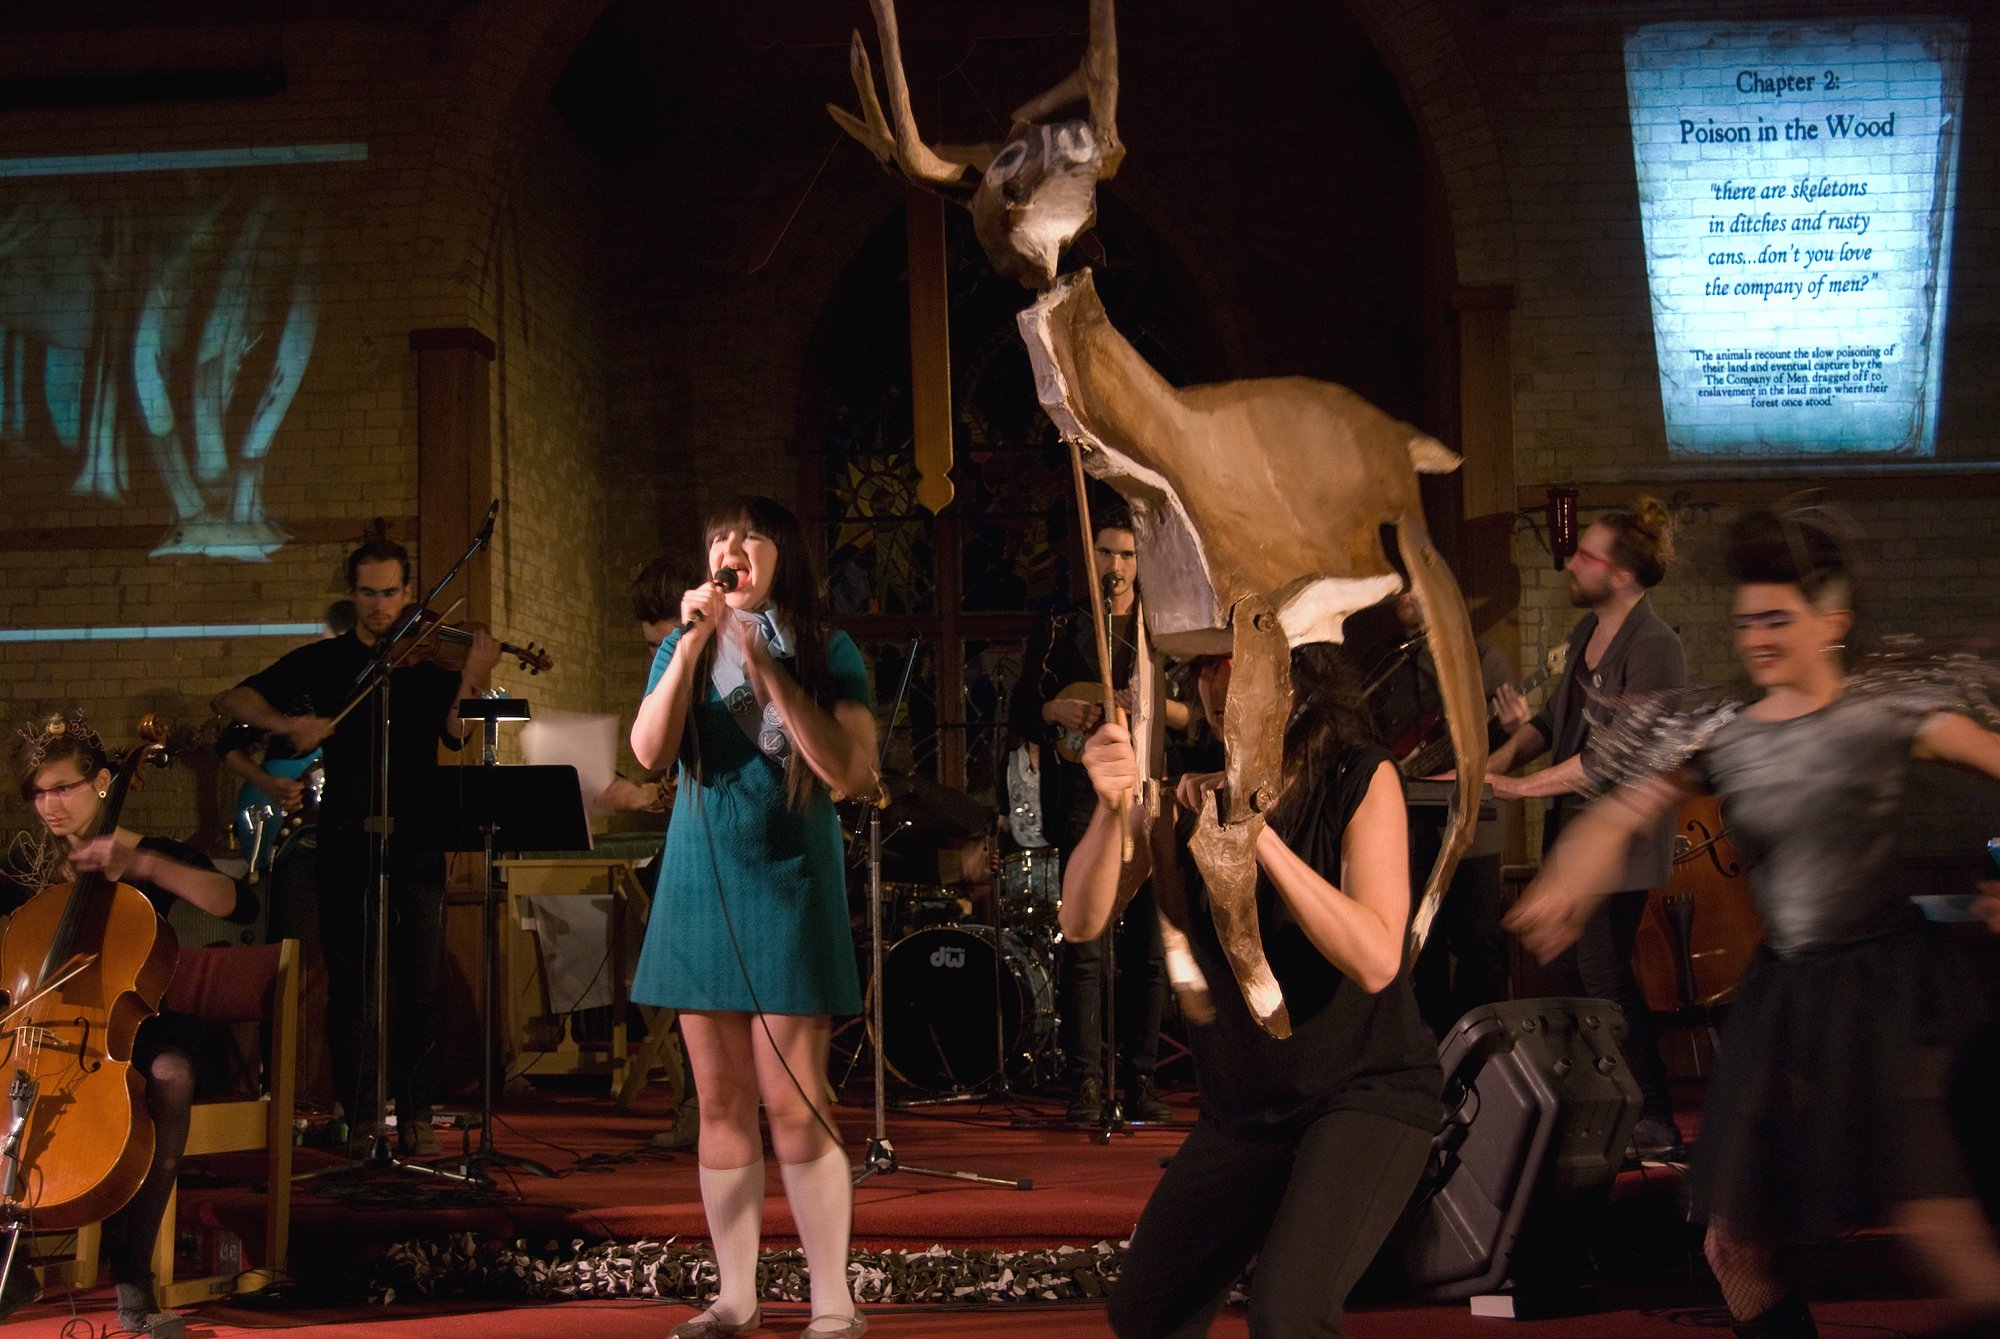 A large ensemble of singers, string players and a life sized deer puppet